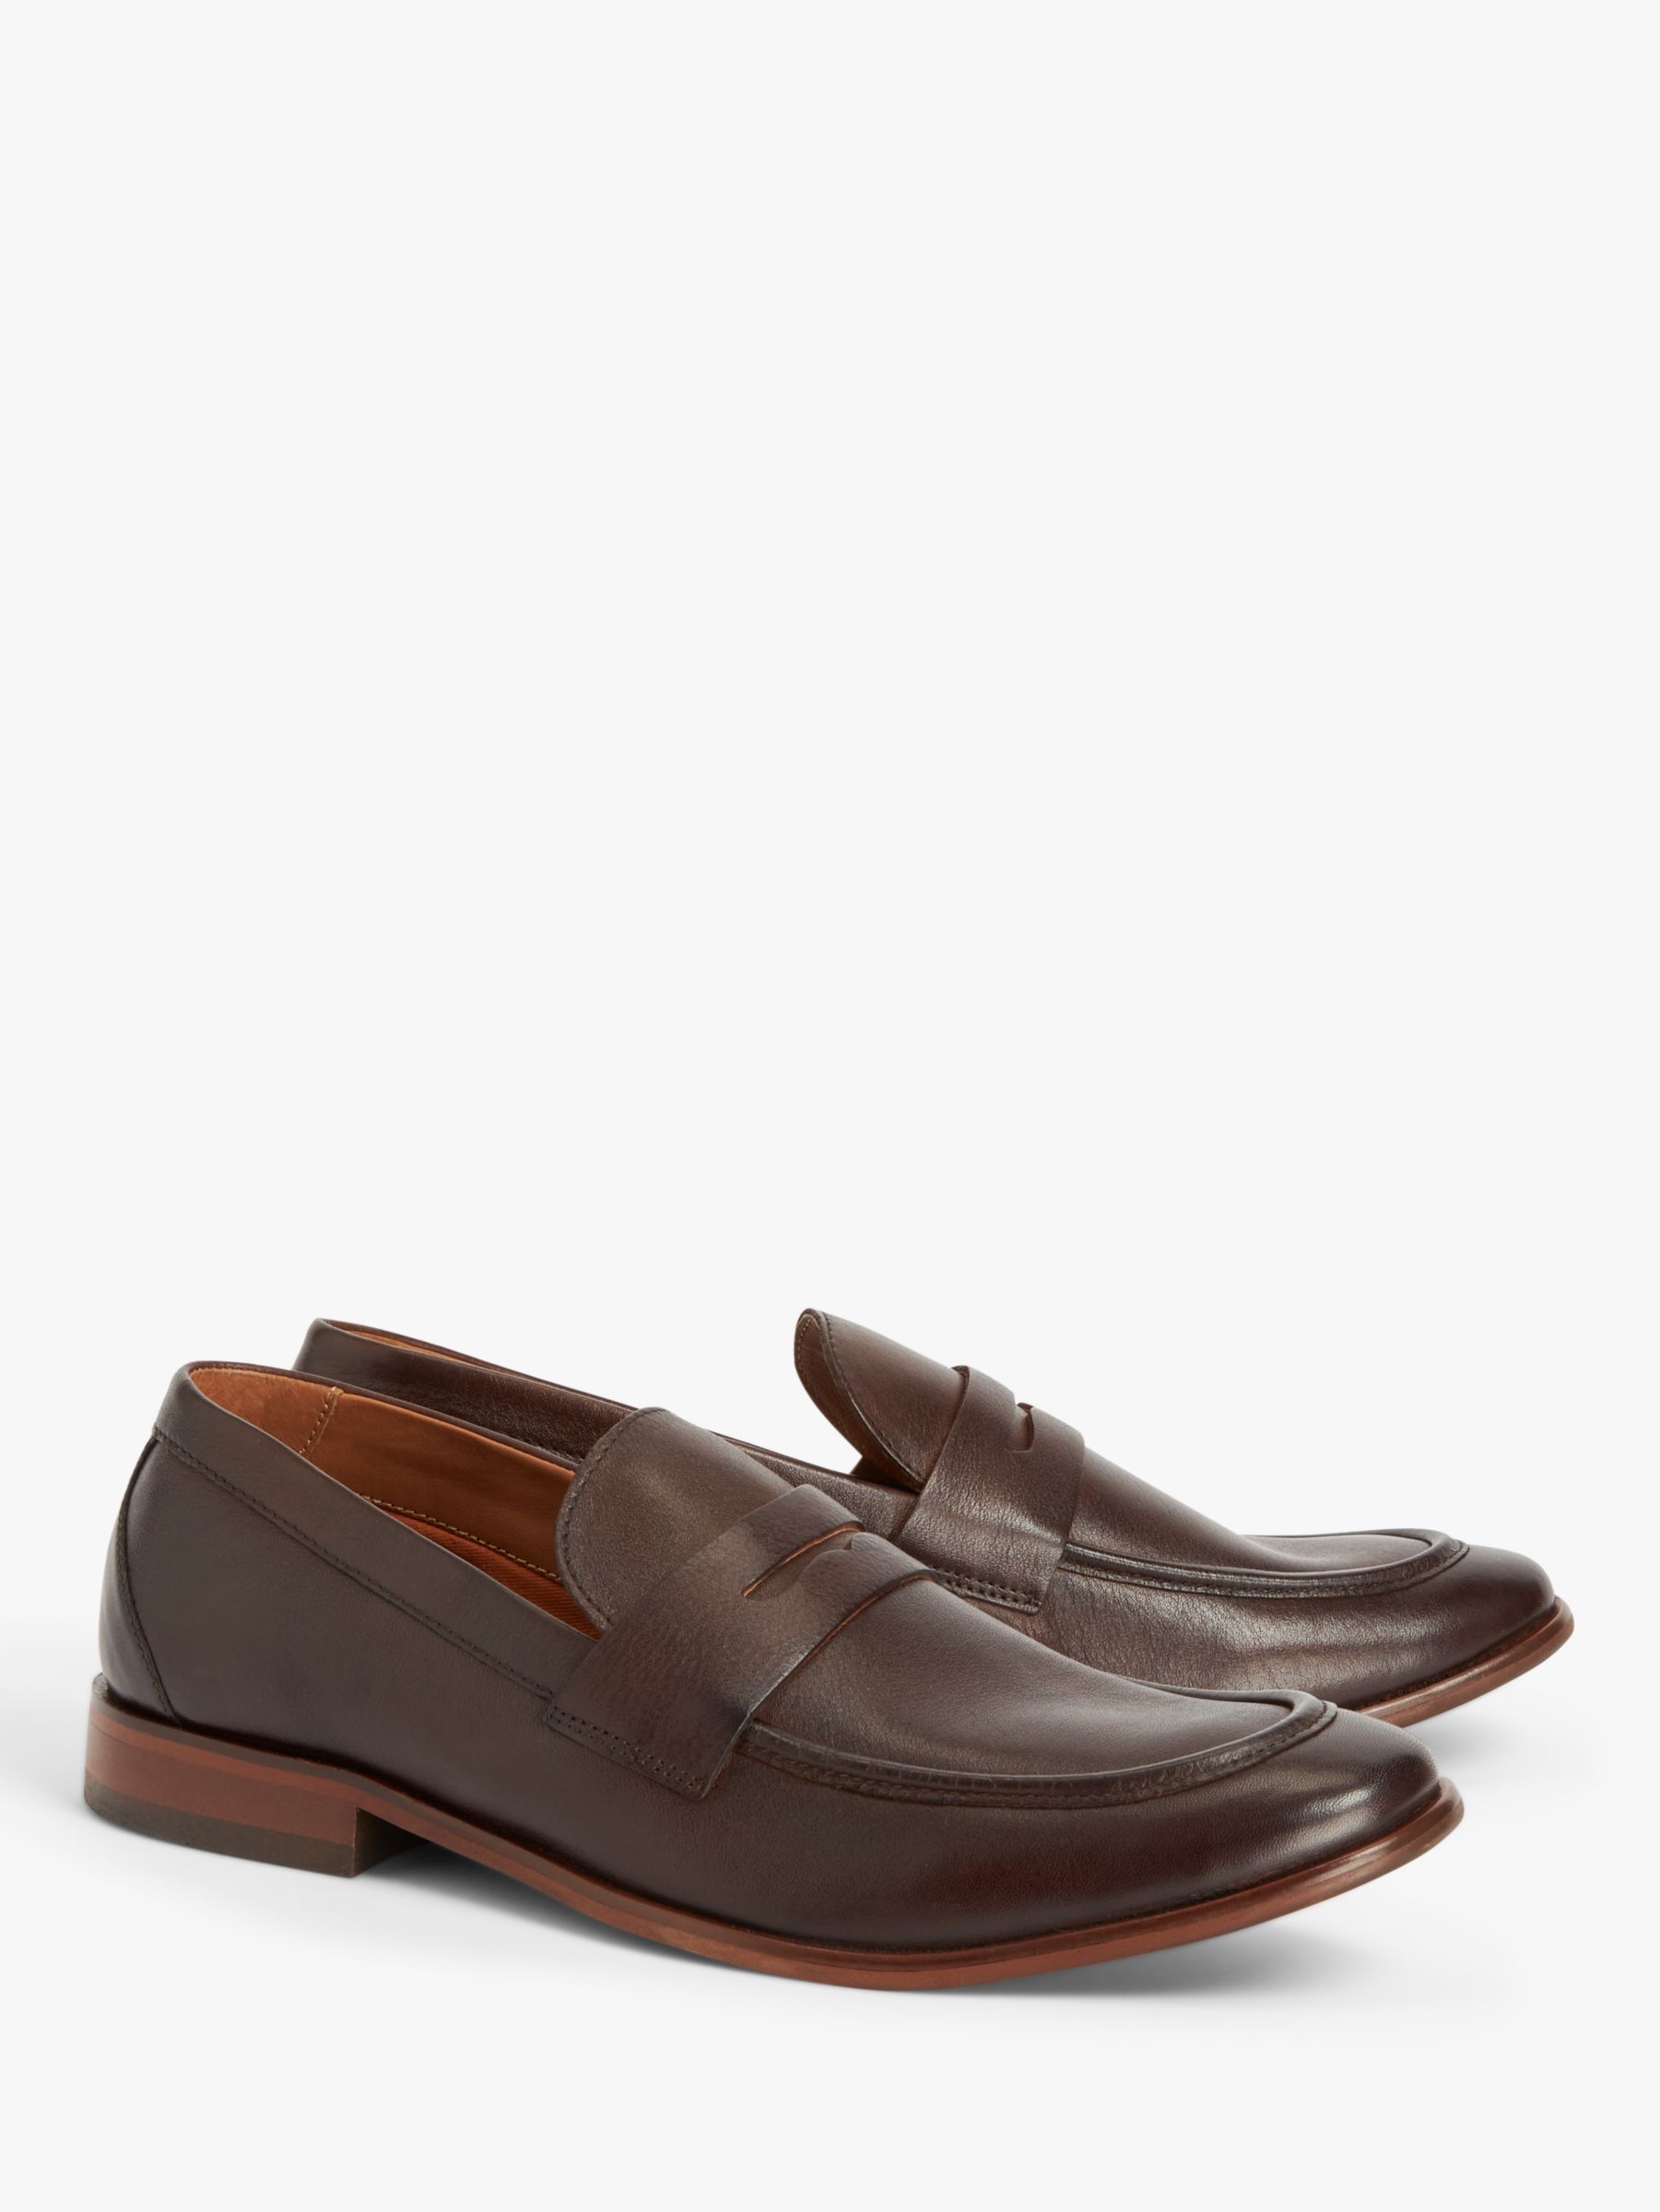 John Lewis Leather Penny Loafers, Chestnut at John Lewis & Partners